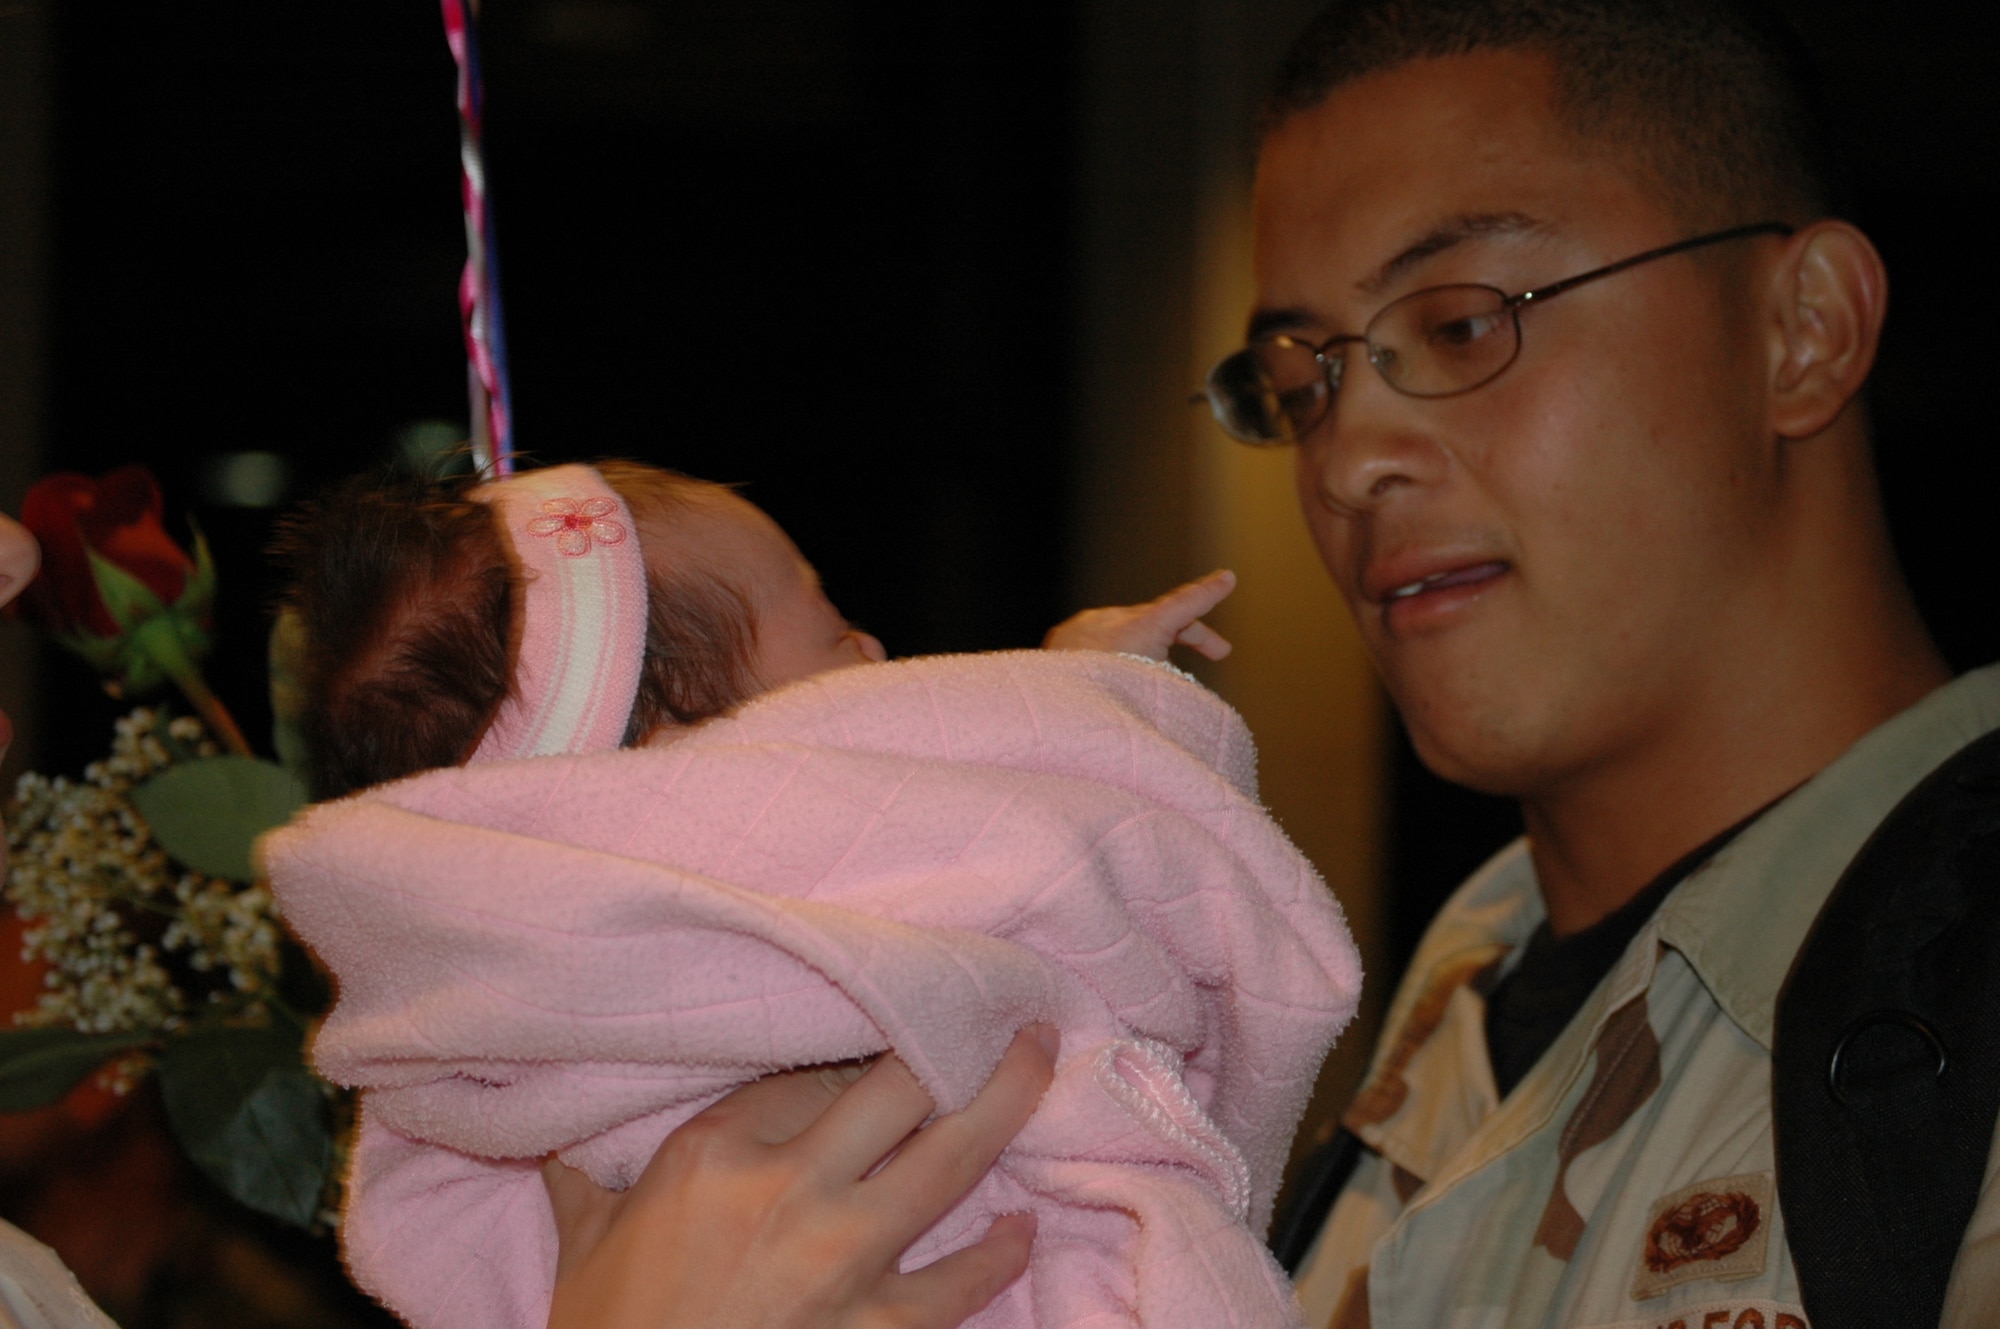 HILL AIR FORCE BASE, Utah-- Senior Airman Calvin Miranda, 75th Security Forces Squadron, holds his two-month old daughter for the first time since returning from Iraq Oct. 2.  The 45 Airmen returned from a seven month deployment to Iraq. (U.S. Air Force photo by Capt. Genieve David)